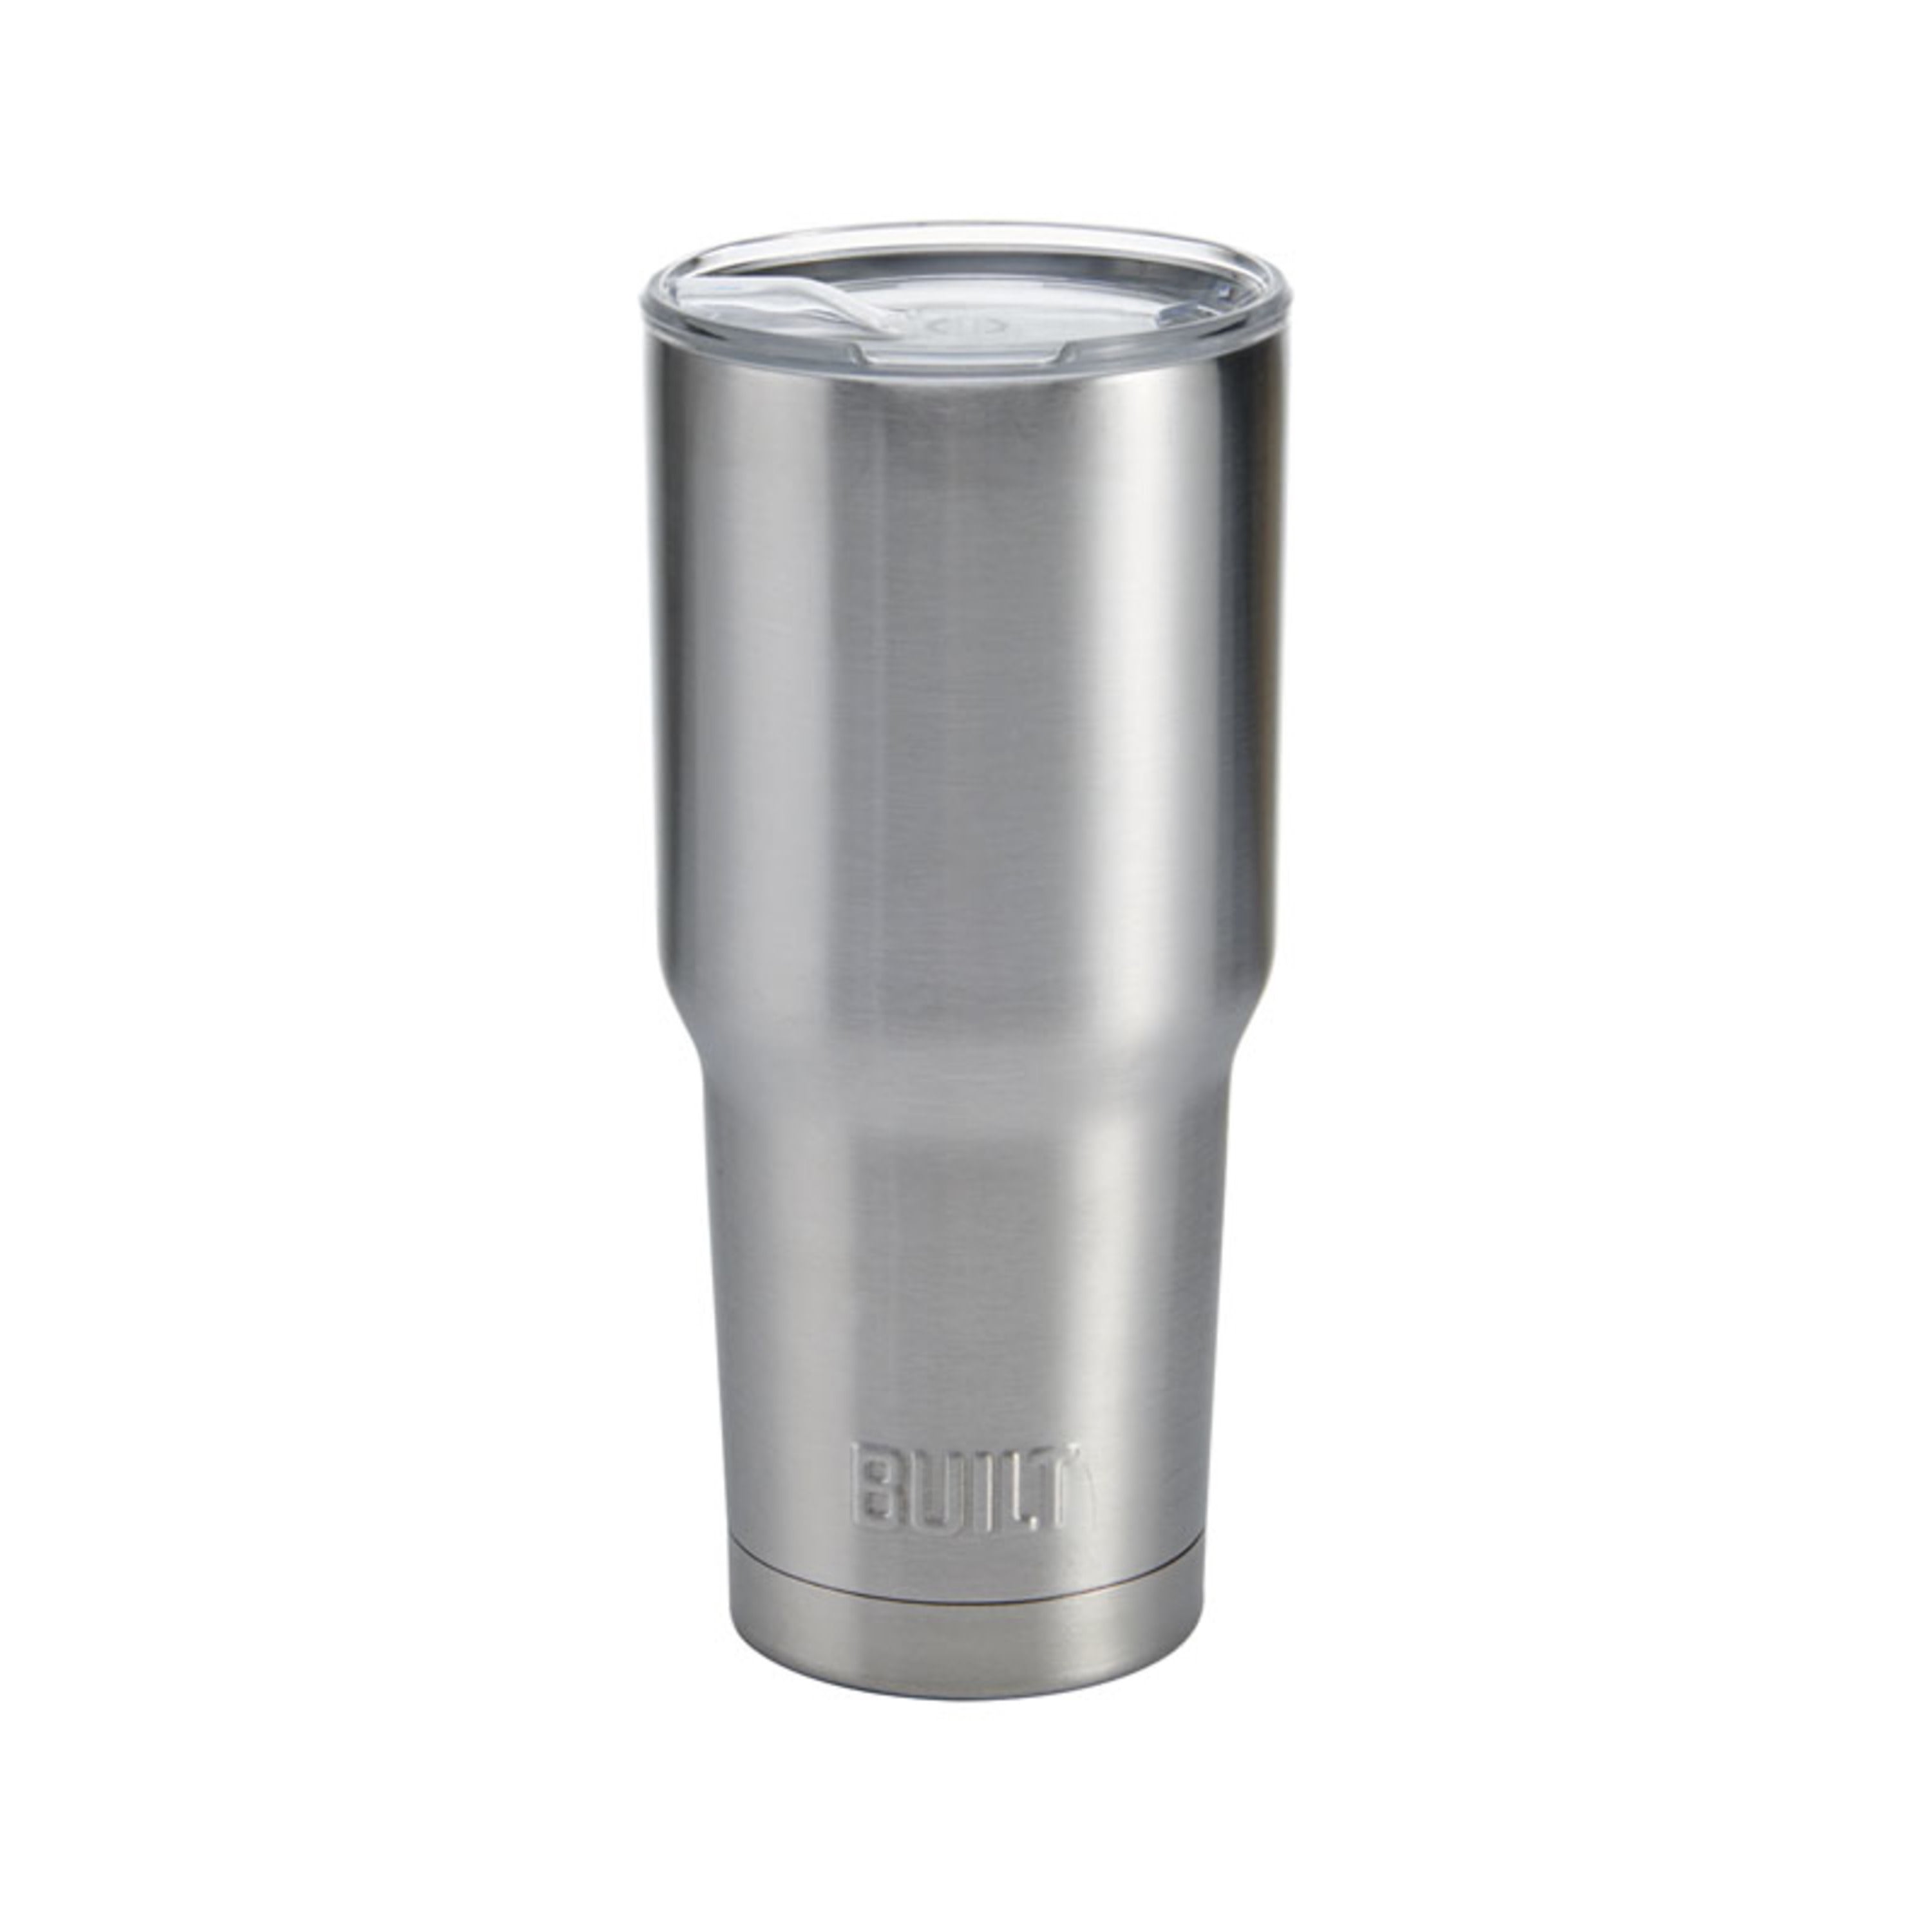 Built 5226259 30-Ounce Double-Walled Stainless Steel Tumbler in Stainless Steel